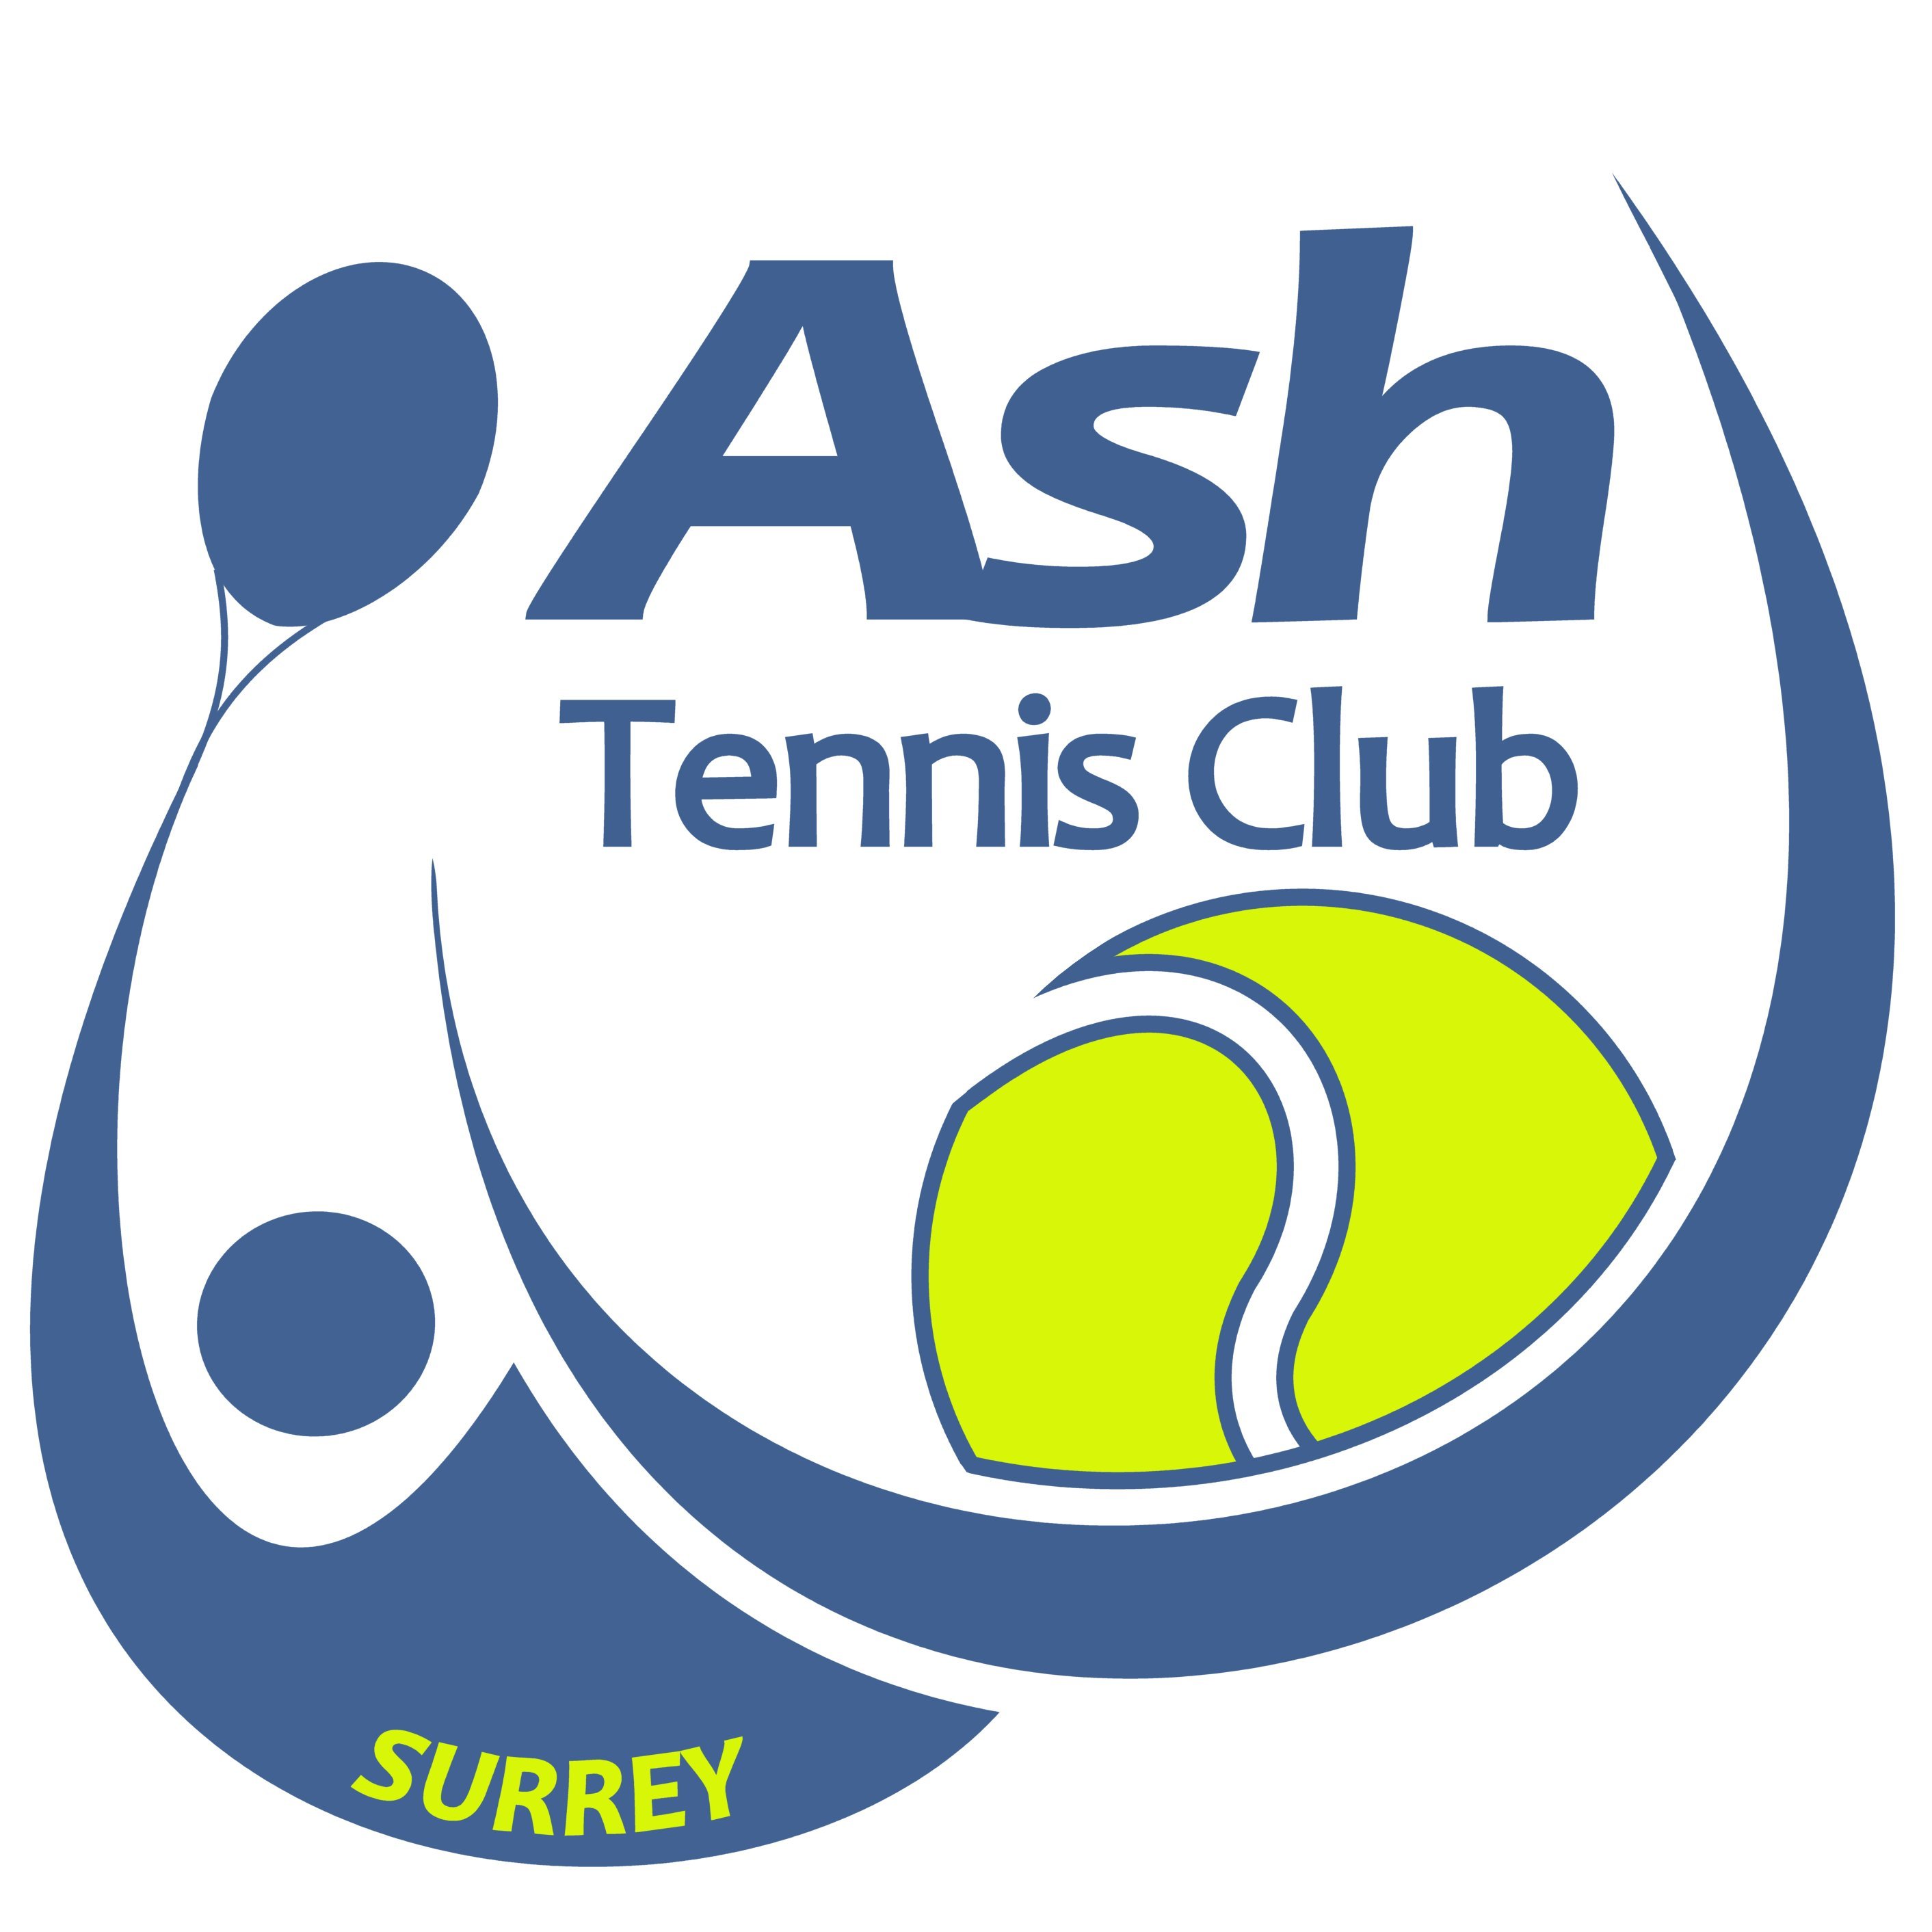 Village Tennis Club on W Surrey/ NE Hants Border. Coronation Gardens, Ash Hill Rd, Ash. New Members Welcome. Coaching for all ages available.